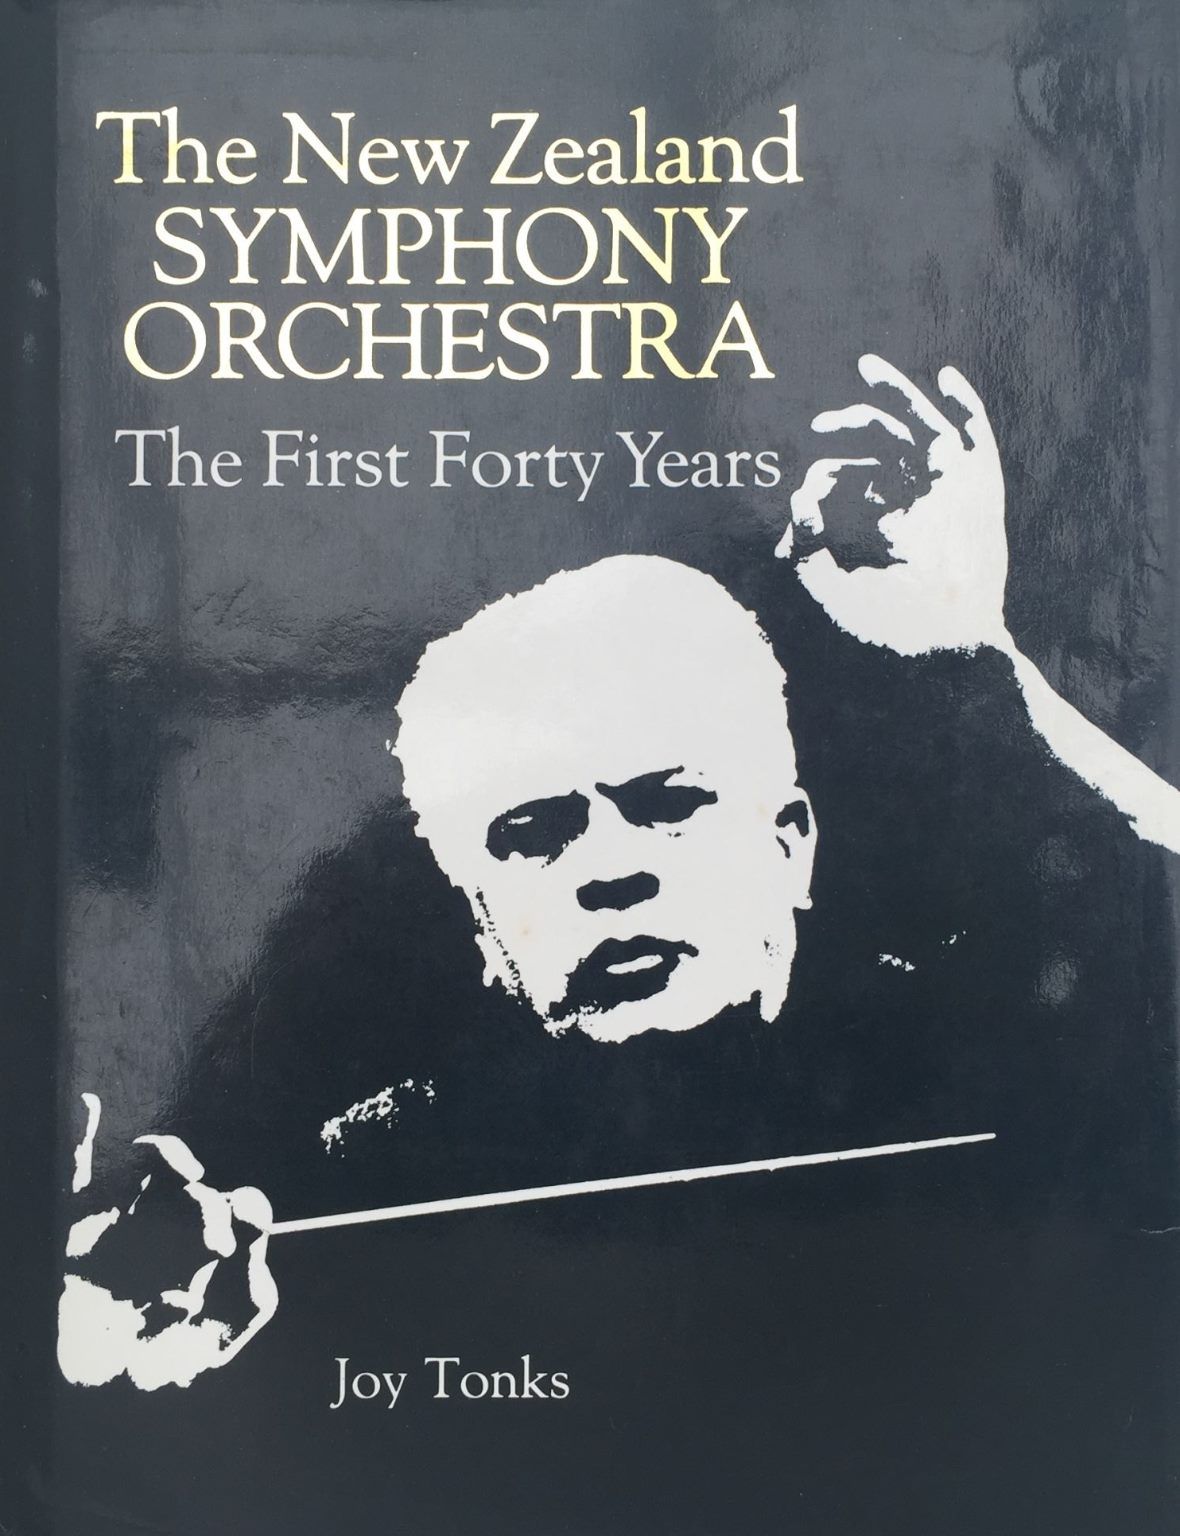 THE NEW ZEALAND SYMPHONY ORCHESTRA: The First Forty Years